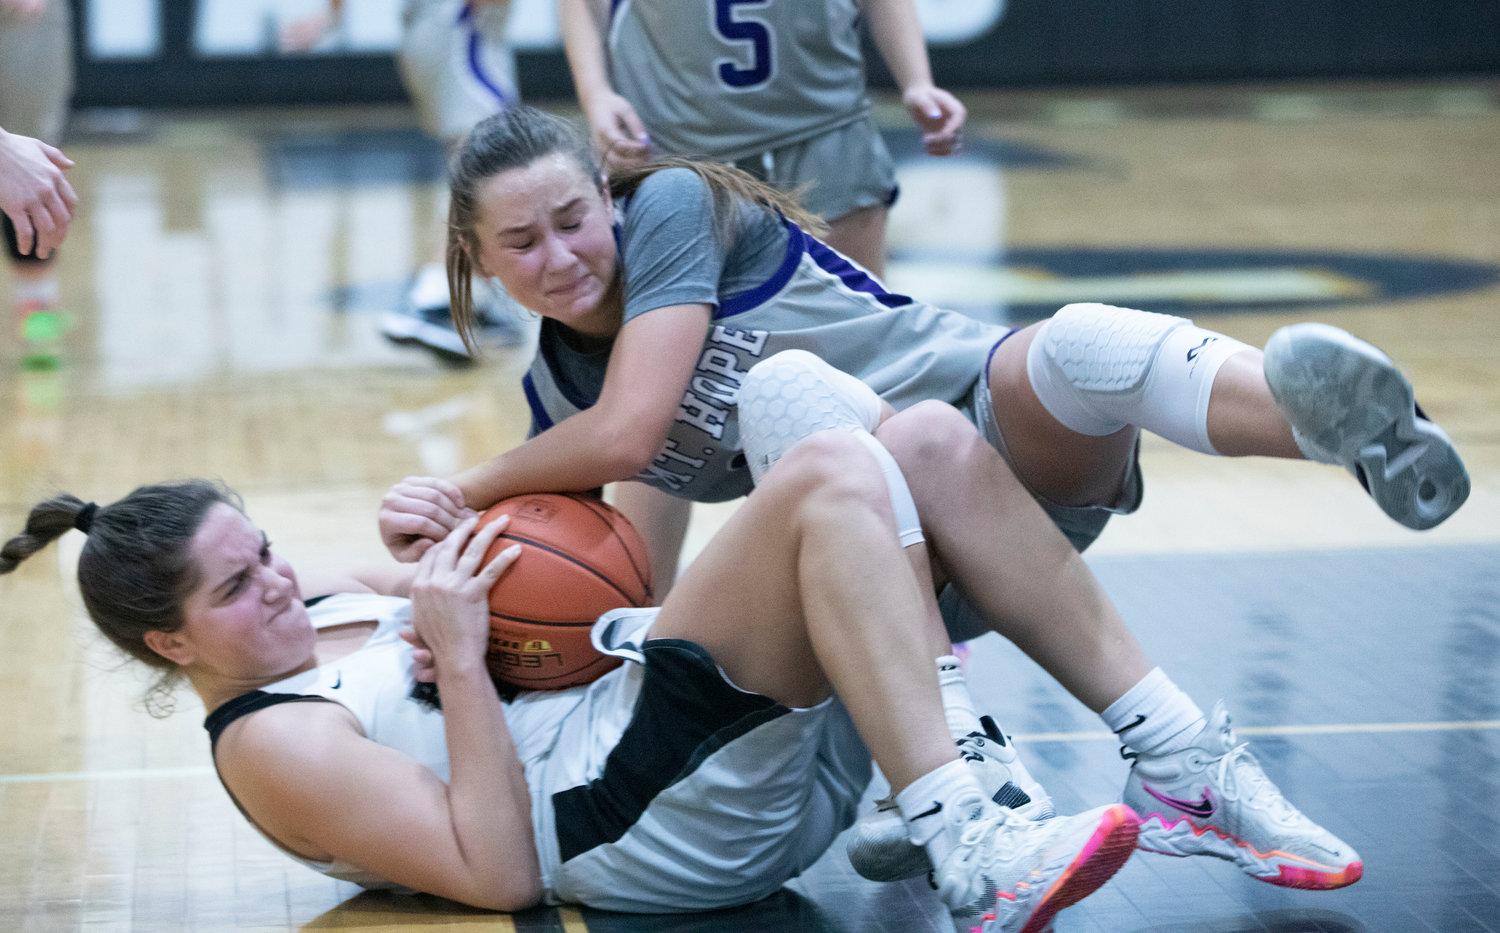 Reyn Ferris fights for a loose ball during the Huskies' preliminary playoff game at Pilgrim on Monday night. Mt Hope lost the game 53-47.